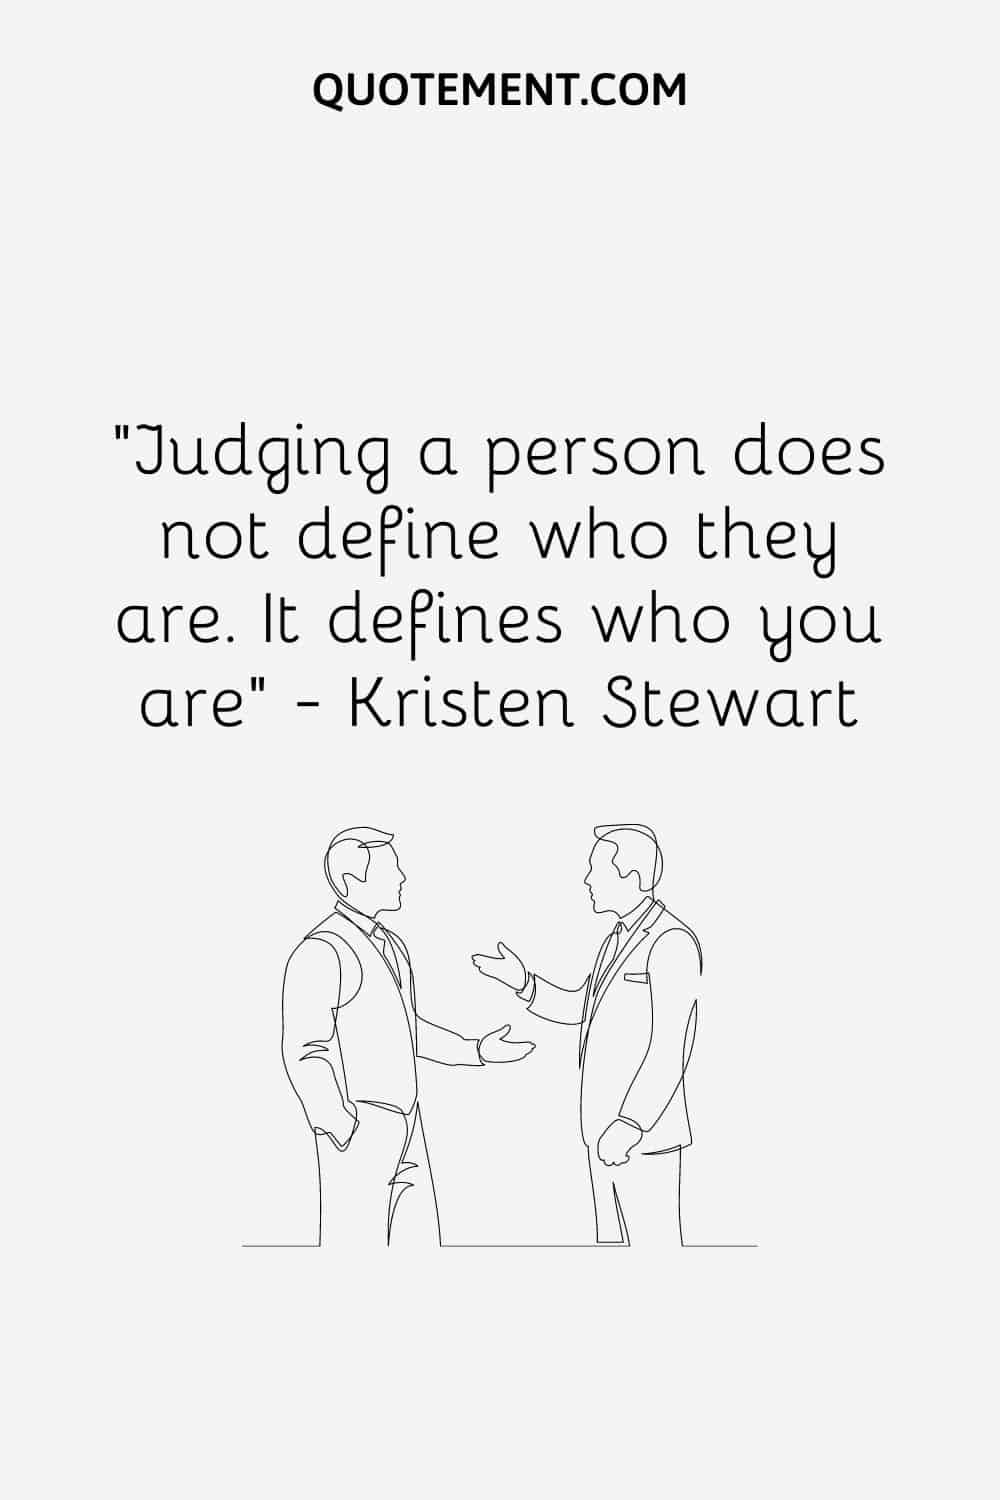 “Judging a person does not define who they are. It defines who you are” — Kristen Stewart